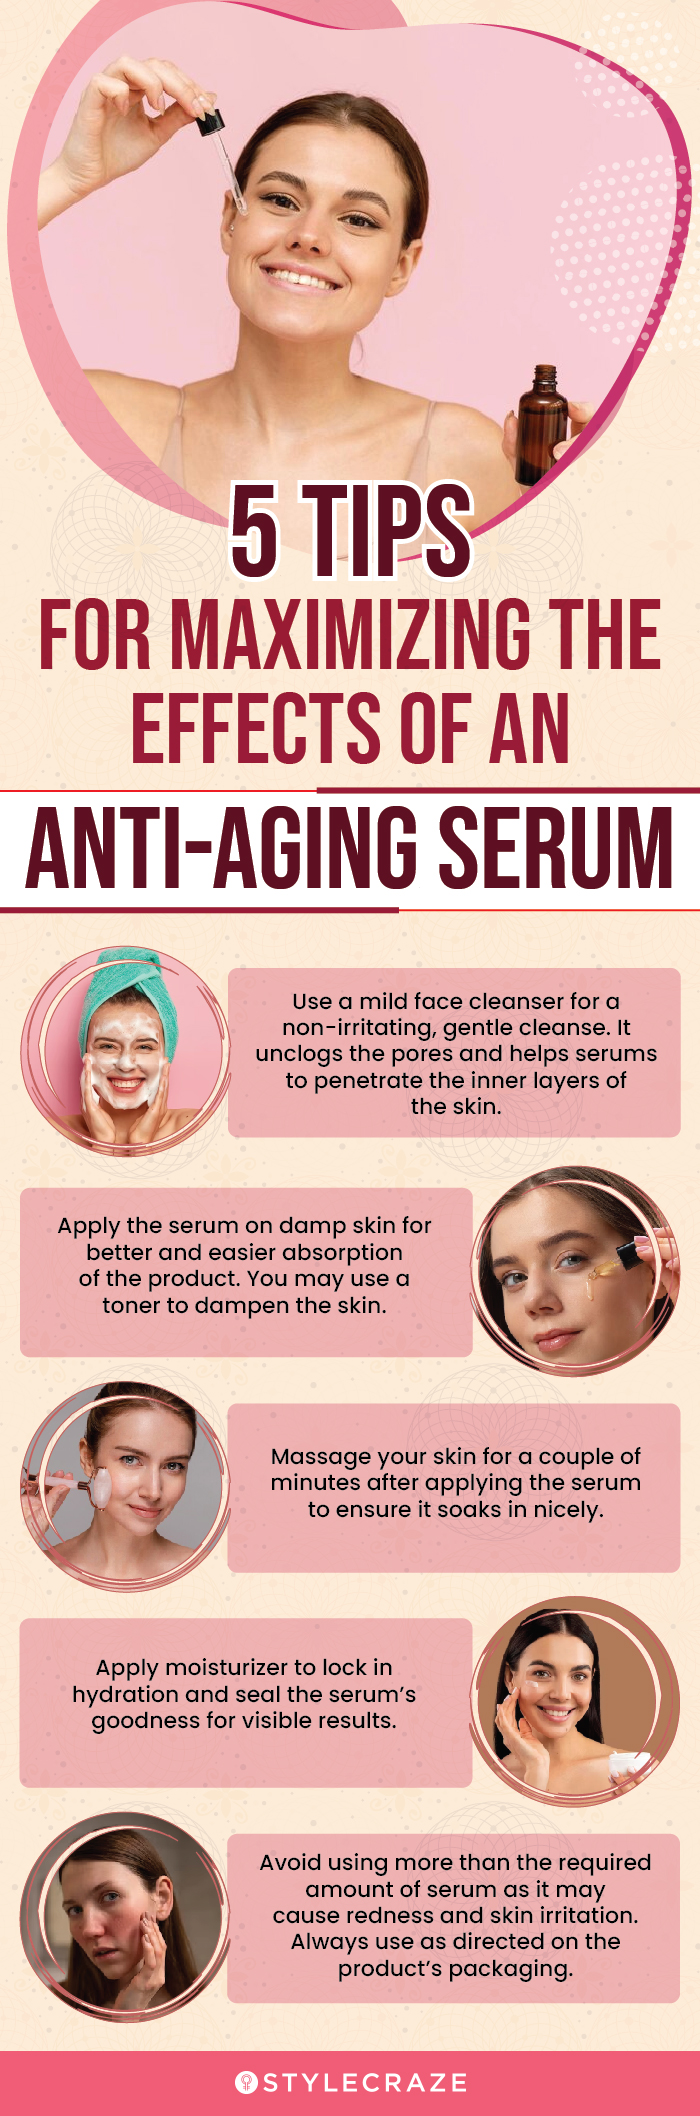 5 Tips For Maximizing The Effects Of An Anti-Aging Serum (infographic)